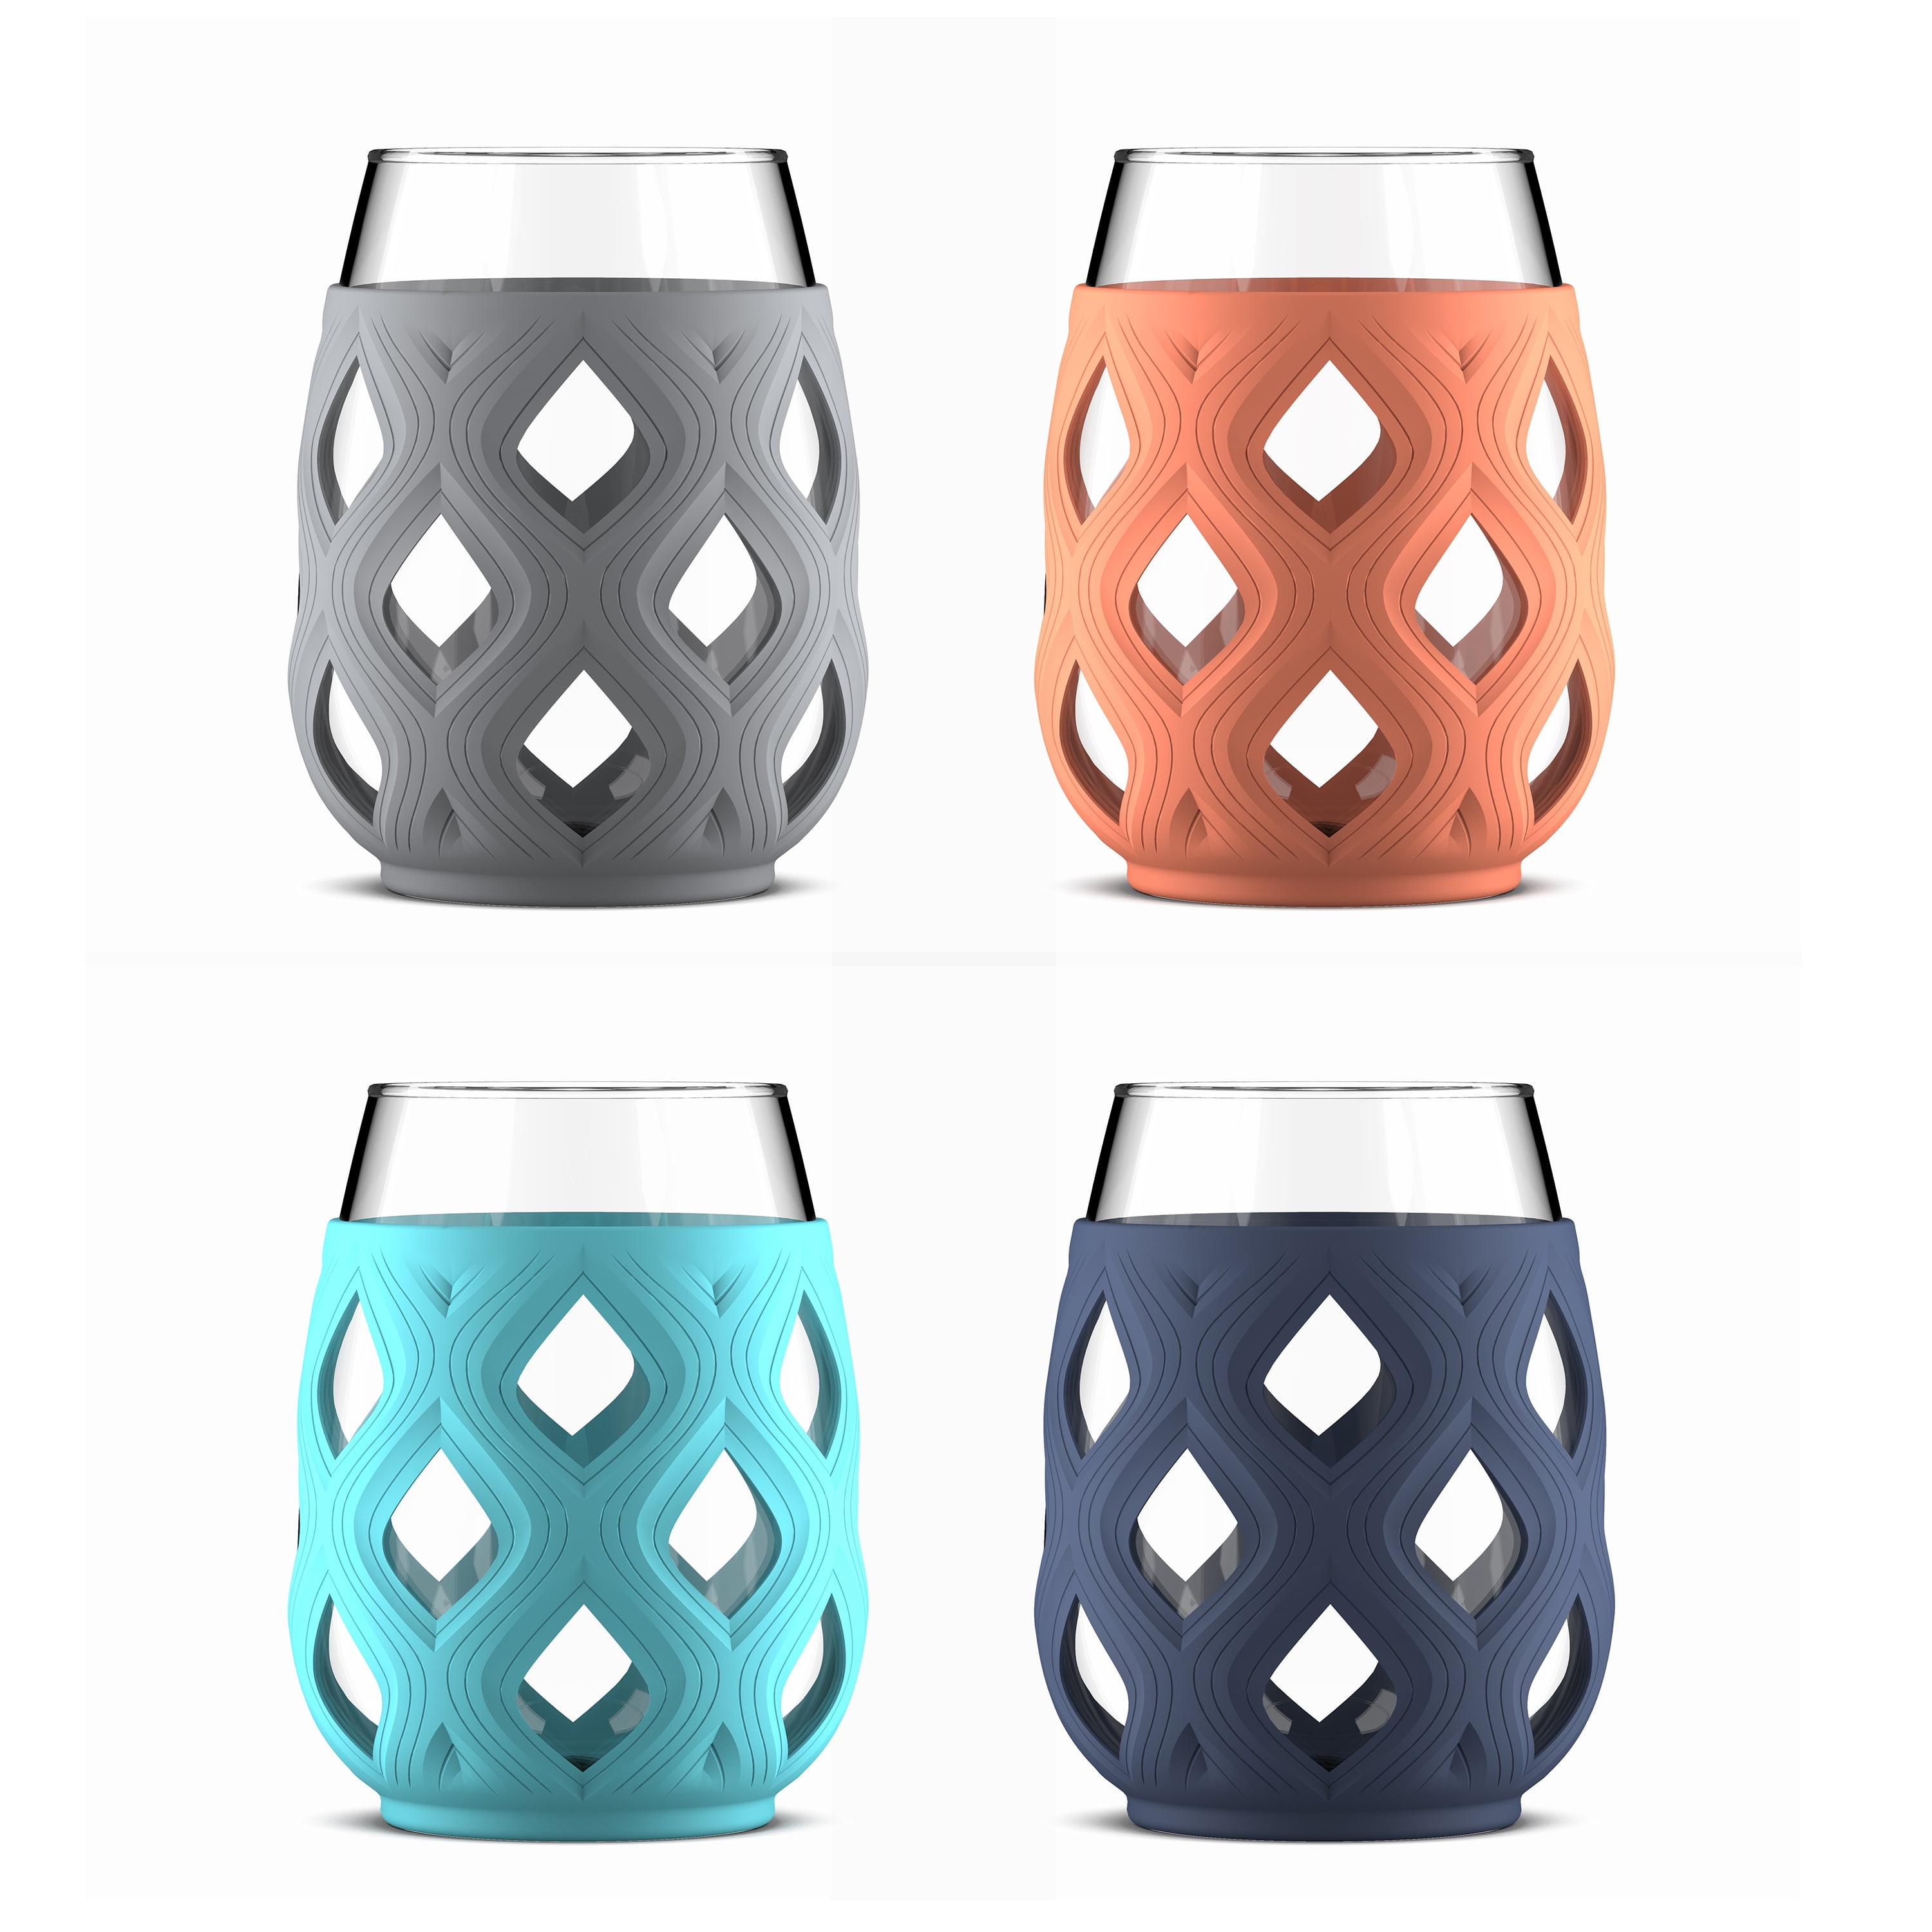 Ello Cru 17oz Stemless Wine Glass Set with Protective Silicone Sleeves, 4  Pack Cocktail Glass for Mother's Day Gift